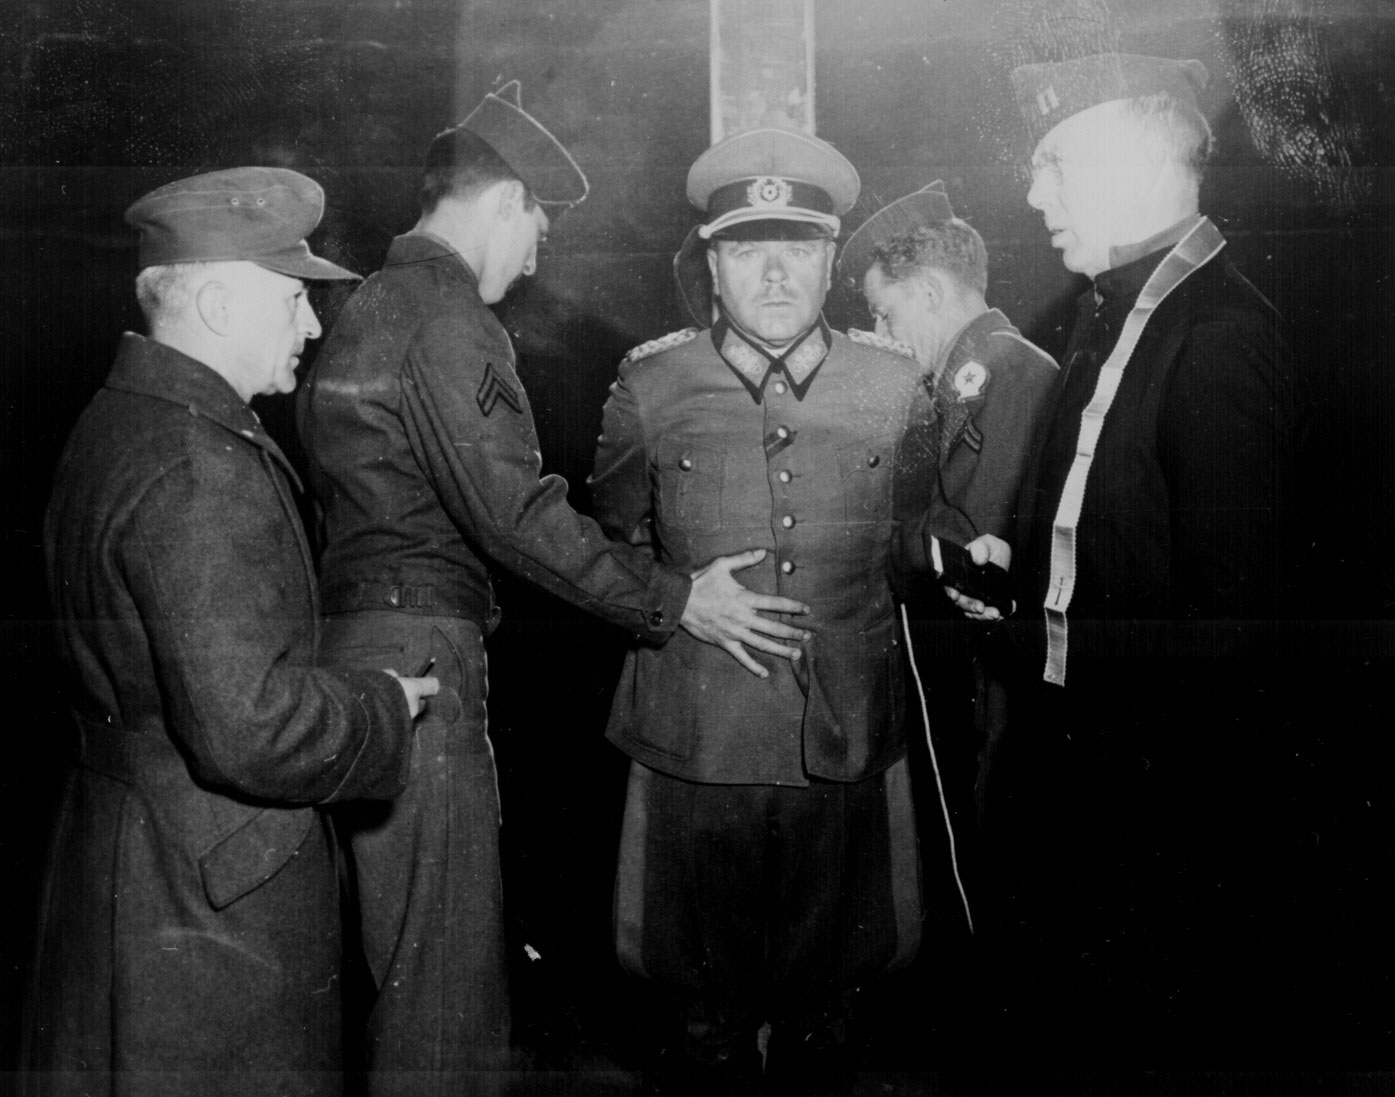 Dostler tied to a stake in preparation of his execution by a firing squad, Aversa, Italy, 1 Dec 1945